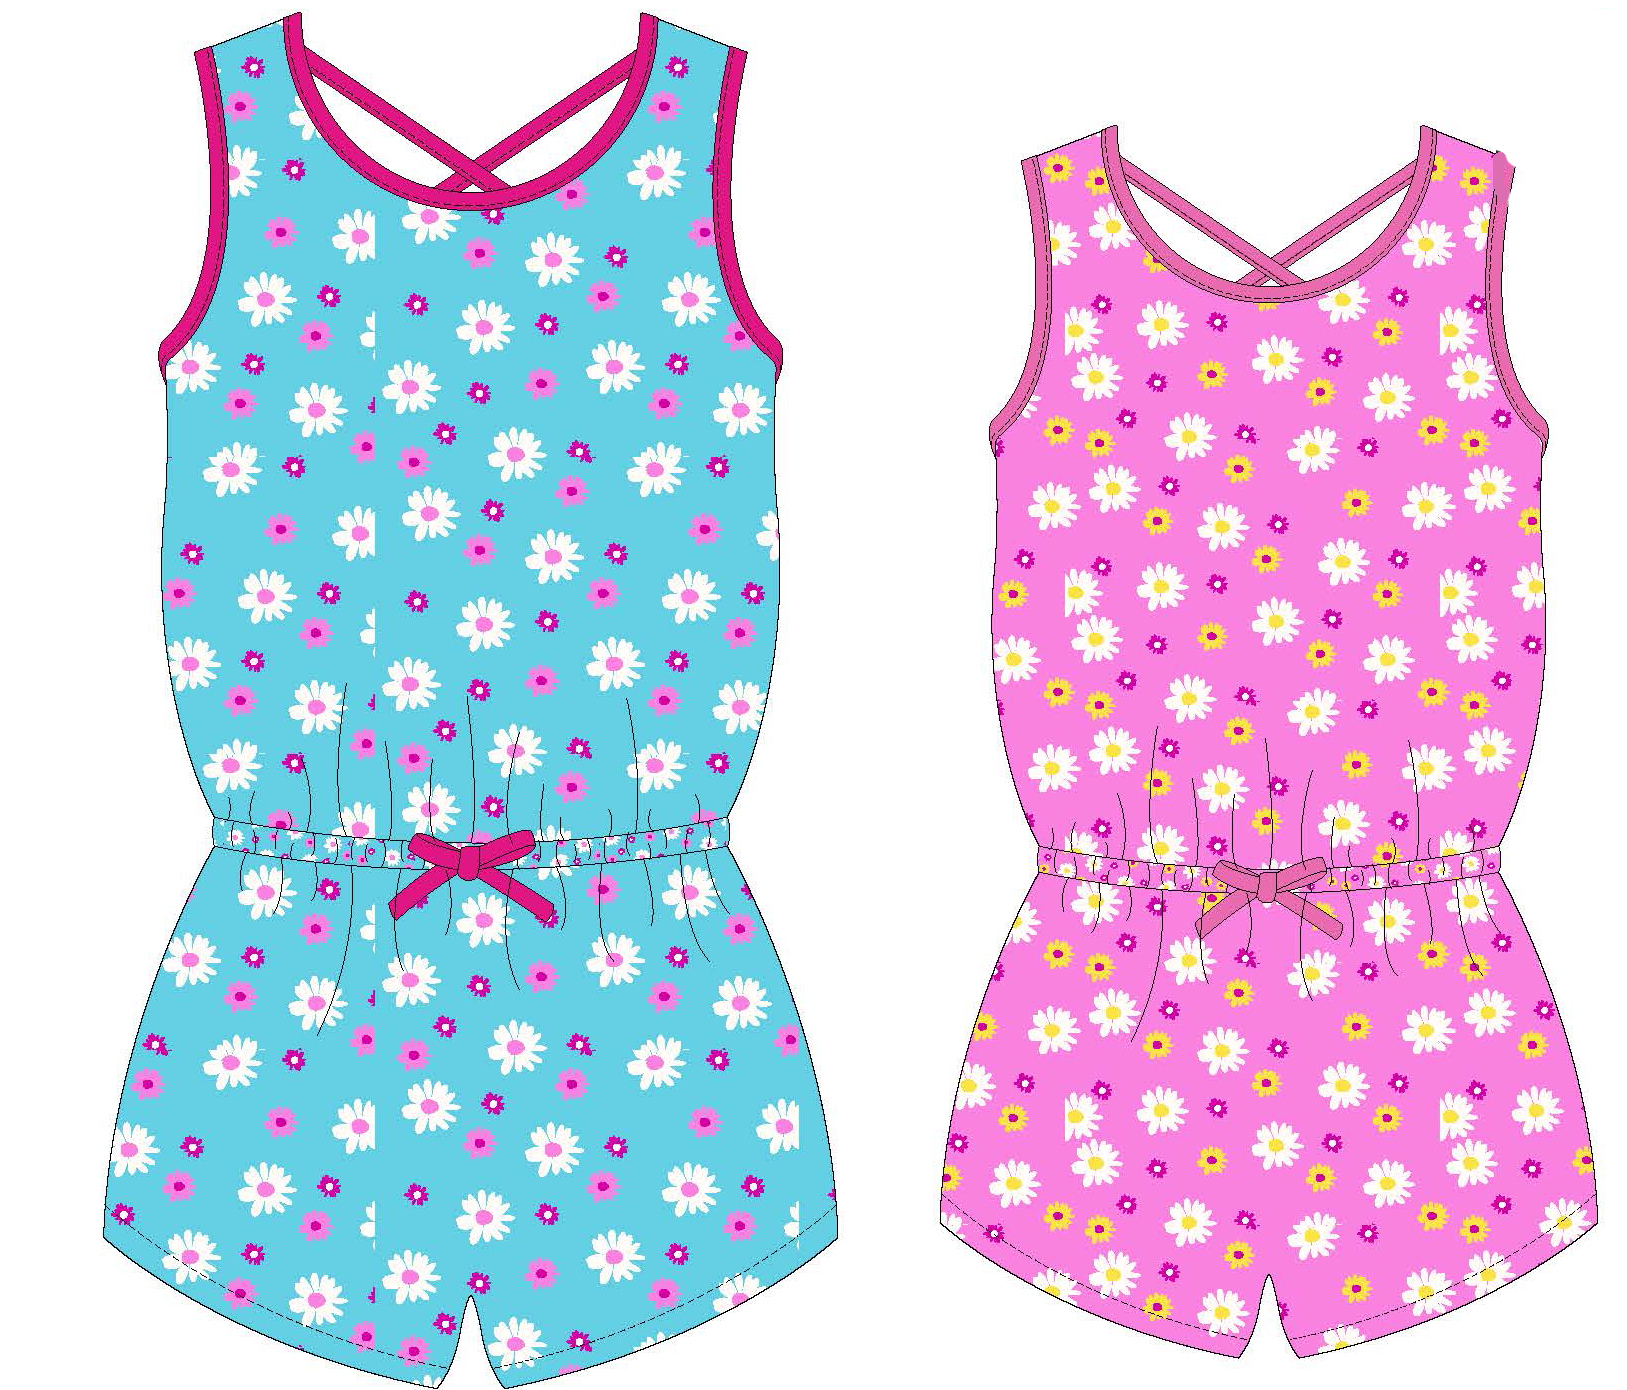 Baby Girl's Printed Knit Romper DRESS w/ Spring Daisy & Floral Print - Size 12M-24M